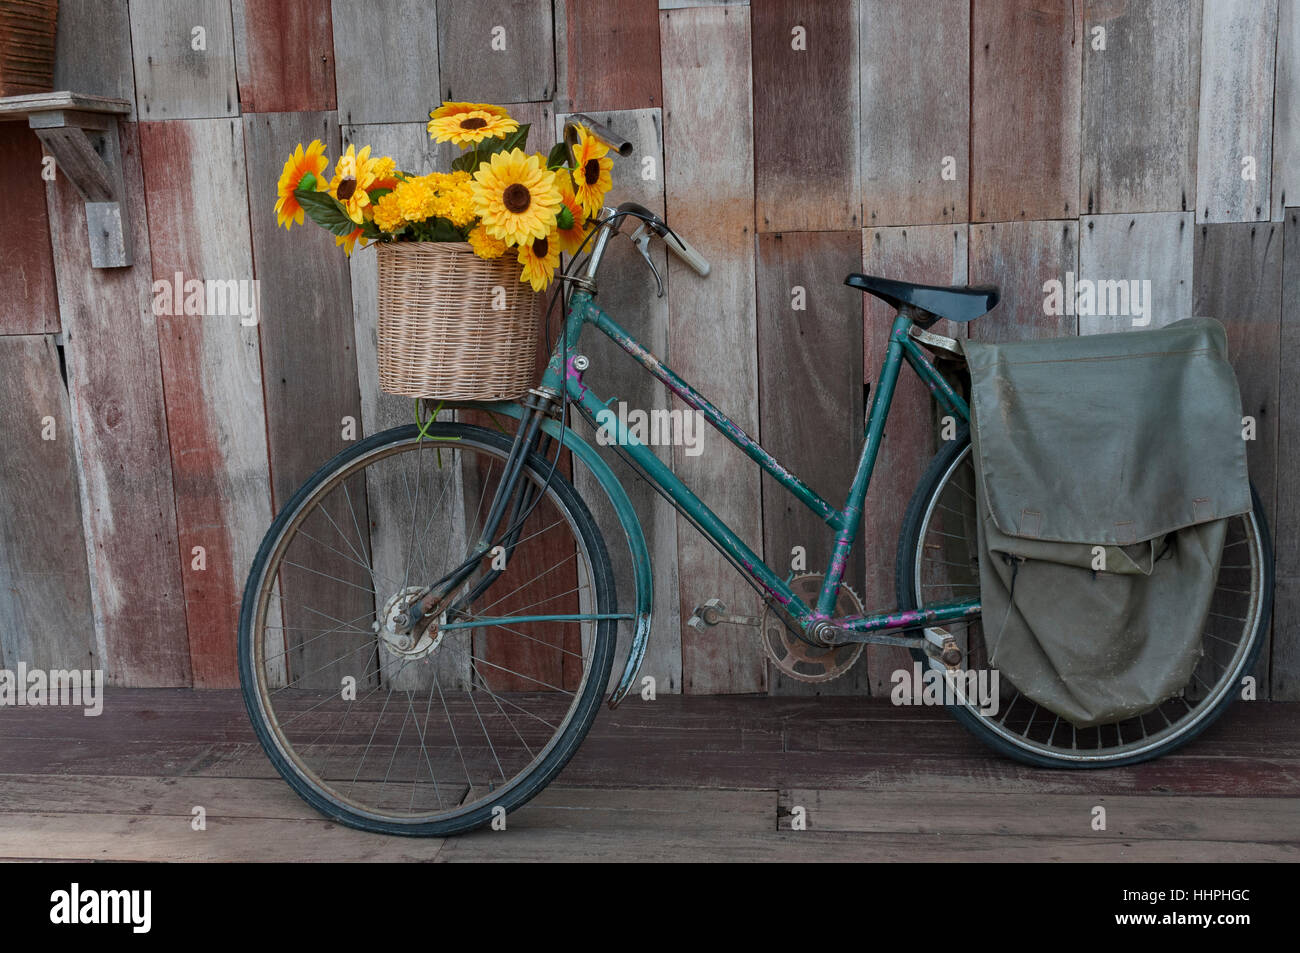 An old pedal bicycle, with a basket full of yellow flowers, leaning against the wooden wall in Nong Khai, Northeast Thailand. Stock Photo